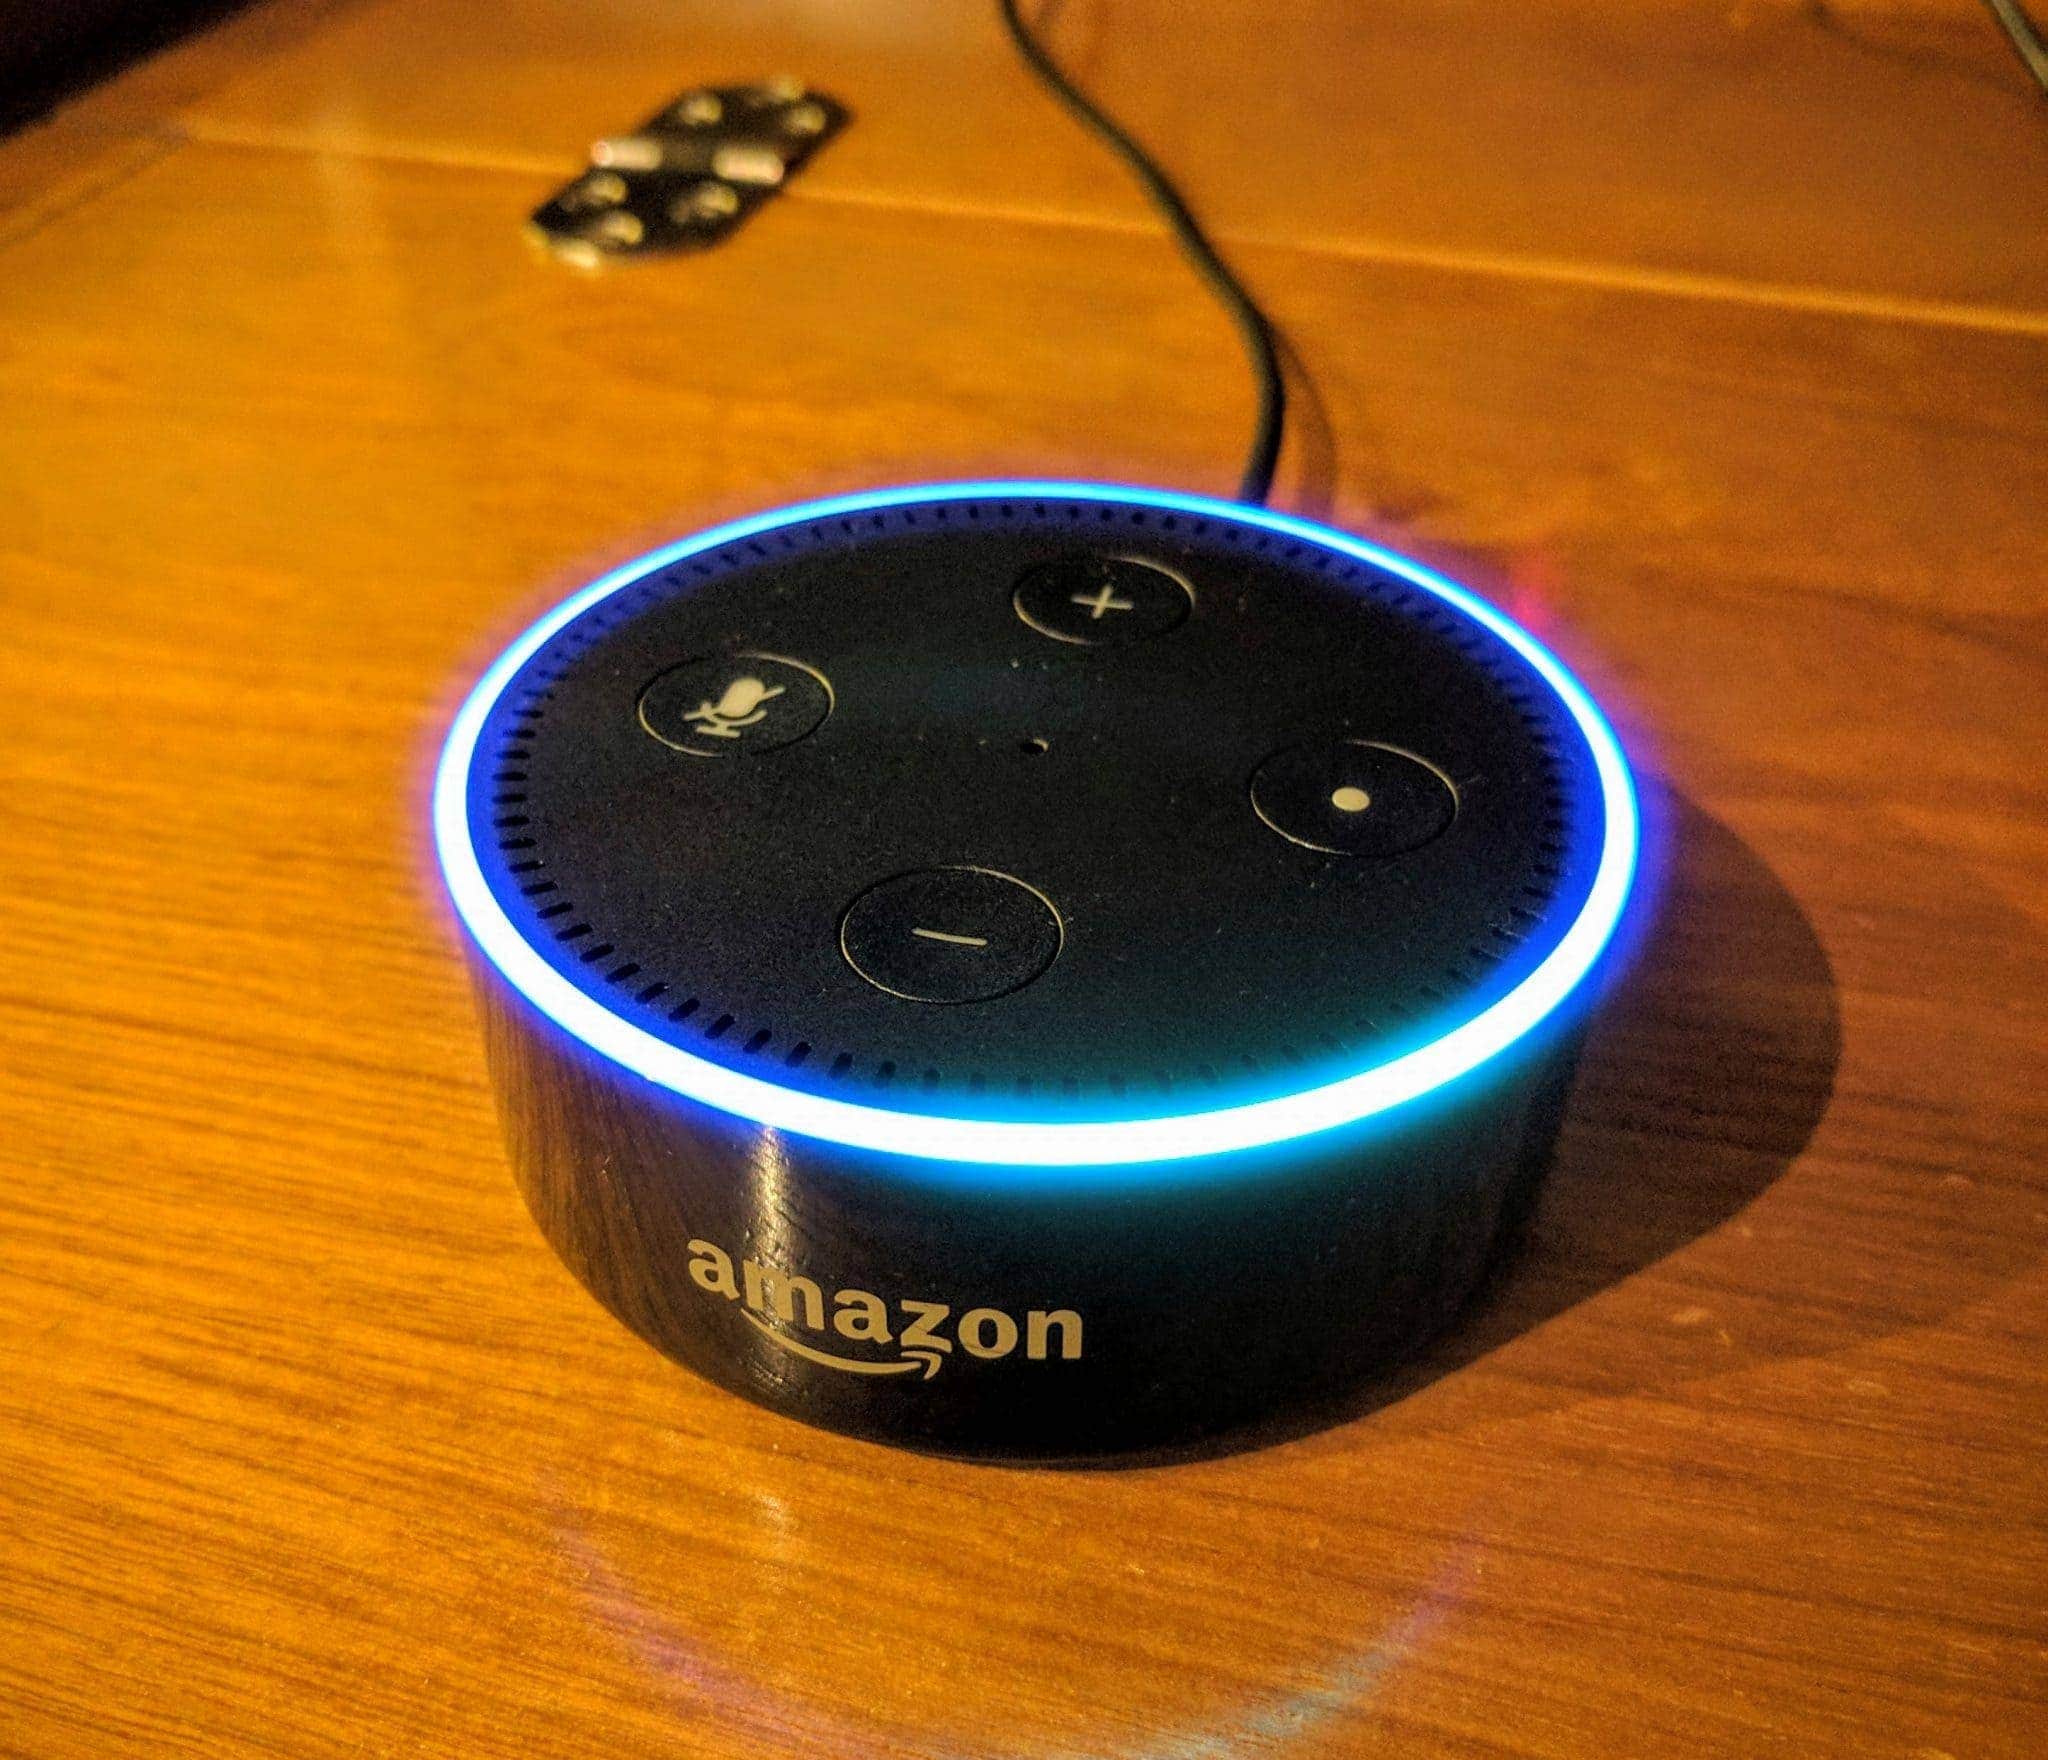 Amazon Echo Dot is perfect for the sailboat